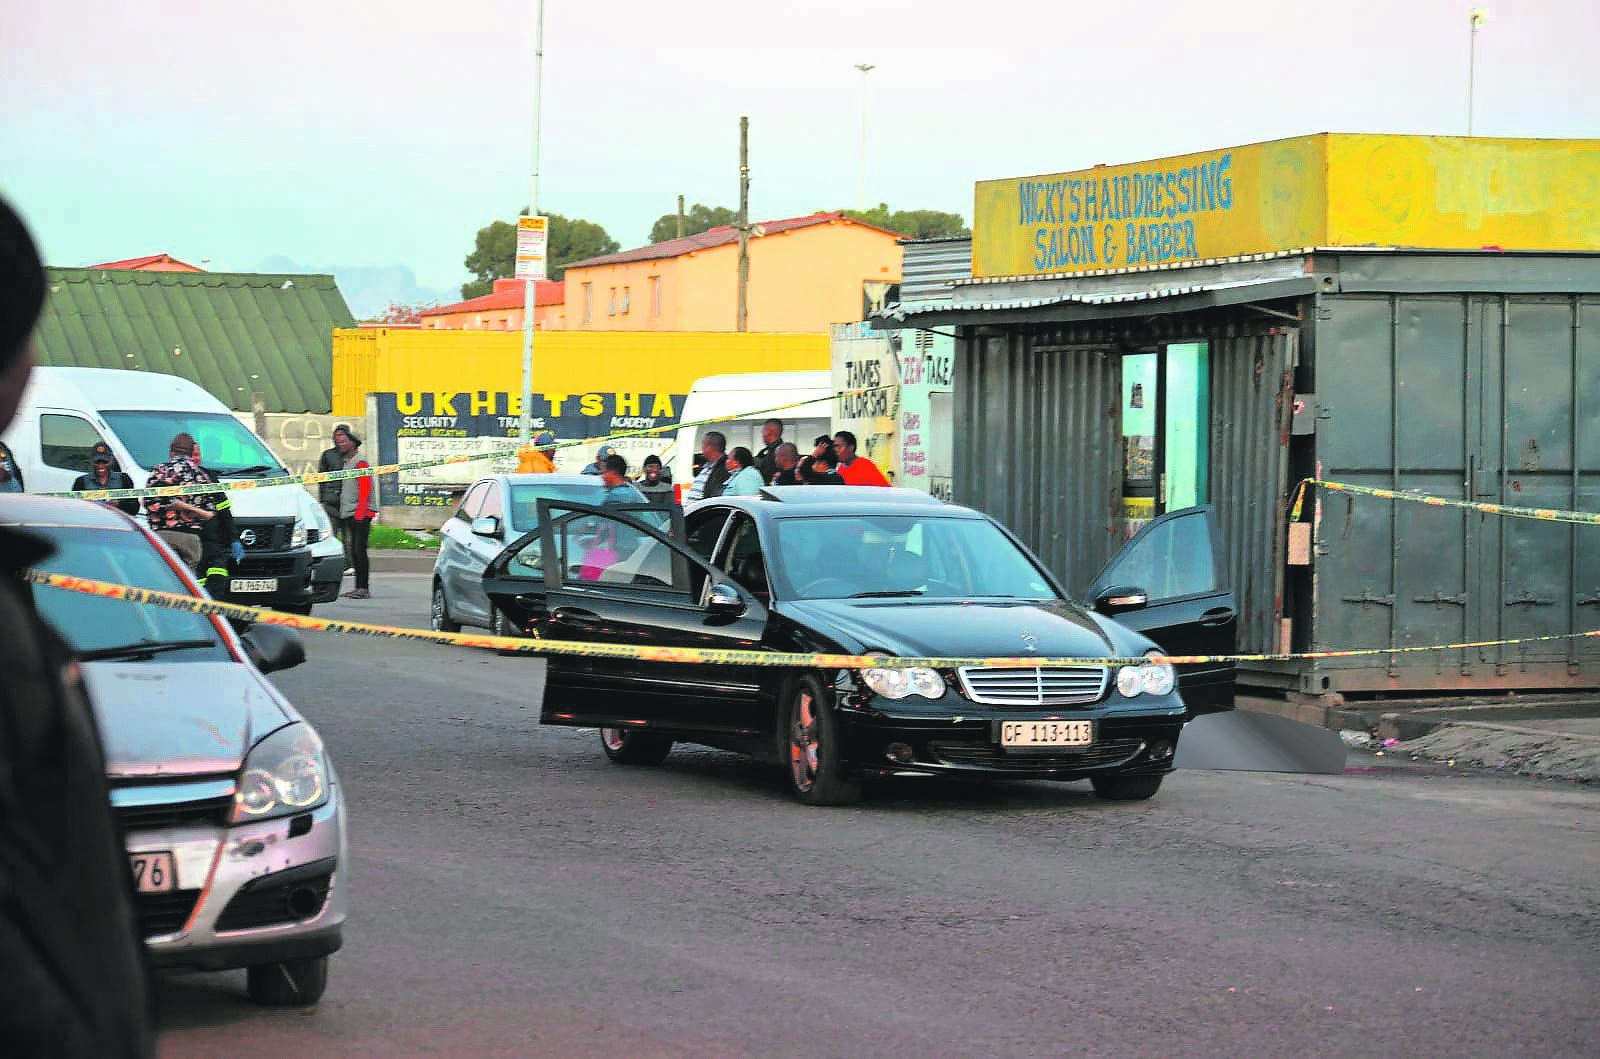 Two men were gunned down while seated in a parked car in Nyanga. Photo by Lulekwa Mbadamane